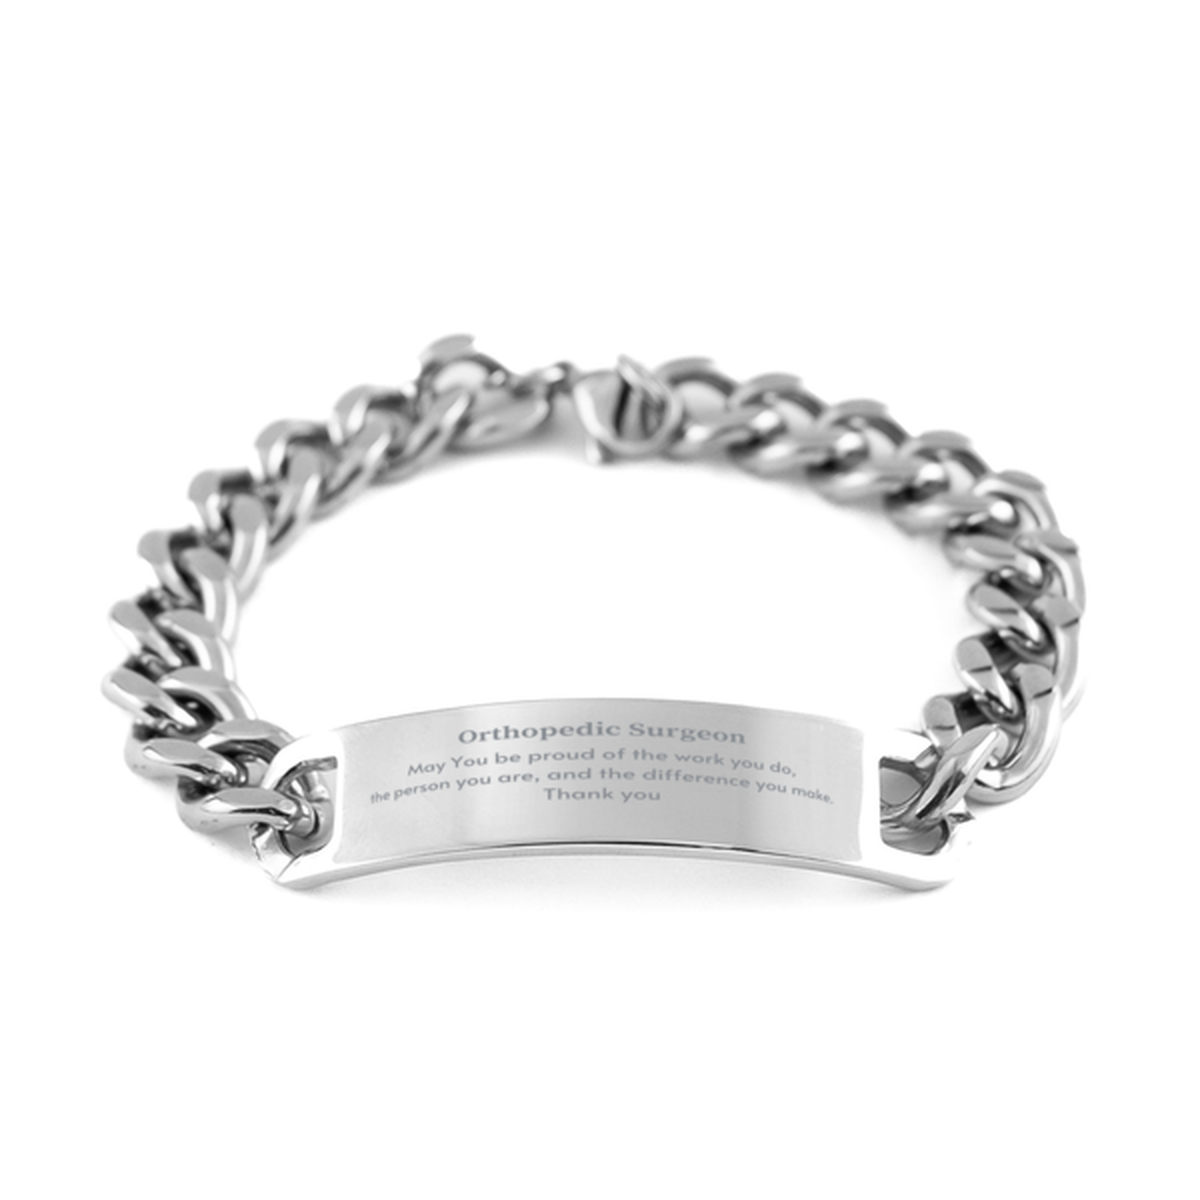 Heartwarming Cuban Chain Stainless Steel Bracelet Retirement Coworkers Gifts for Orthopedic Surgeon, Orthopedic Surgeon May You be proud of the work you do, the person you are Gifts for Boss Men Women Friends